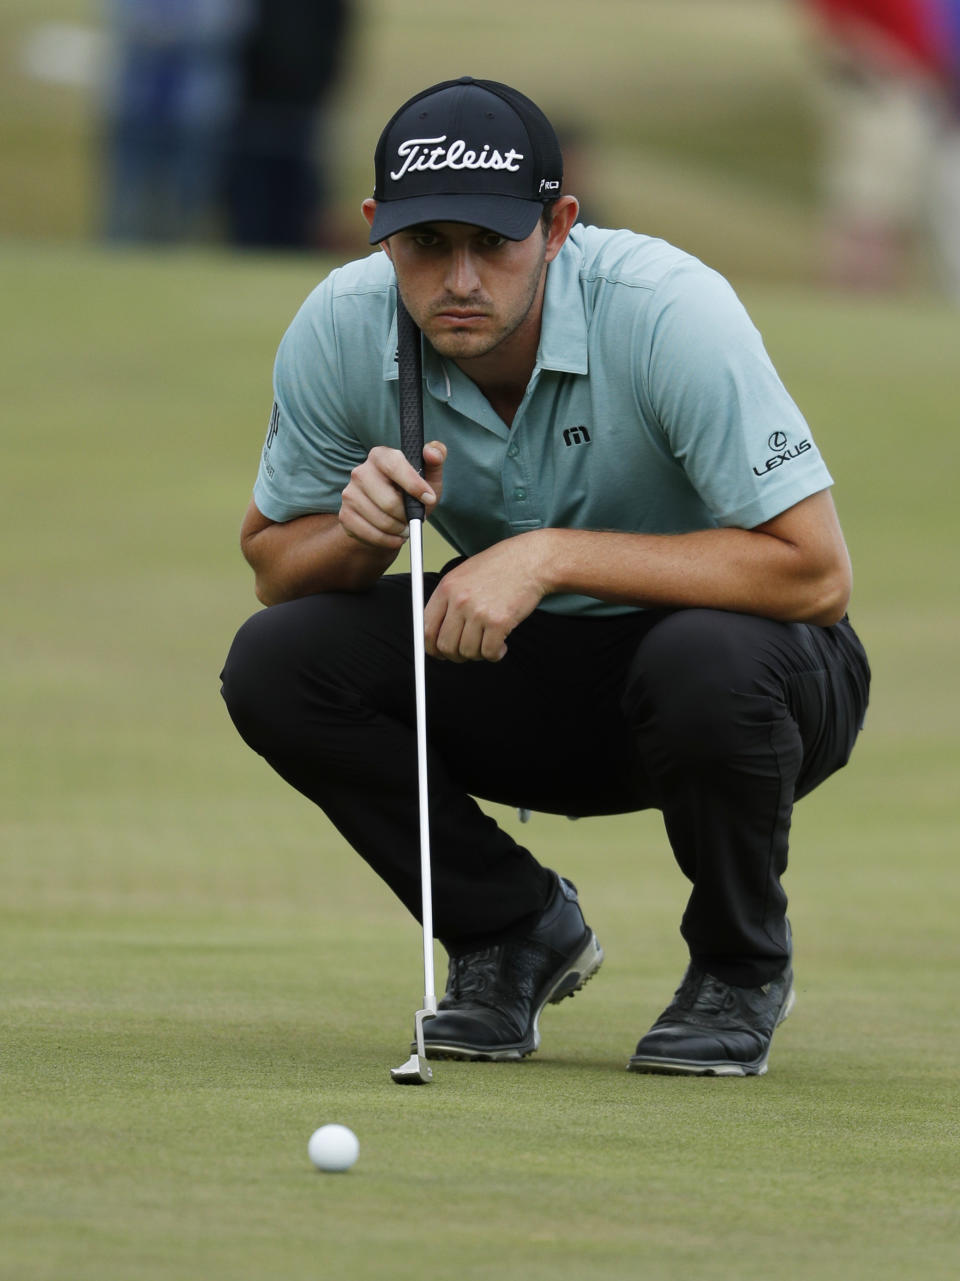 Patrick Cantlay lines up a putt on the 18th green during the final round of the Shriners Hospitals for Children Open golf tournament Sunday, Nov. 4, 2018, in Las Vegas. (AP Photo/John Locher)